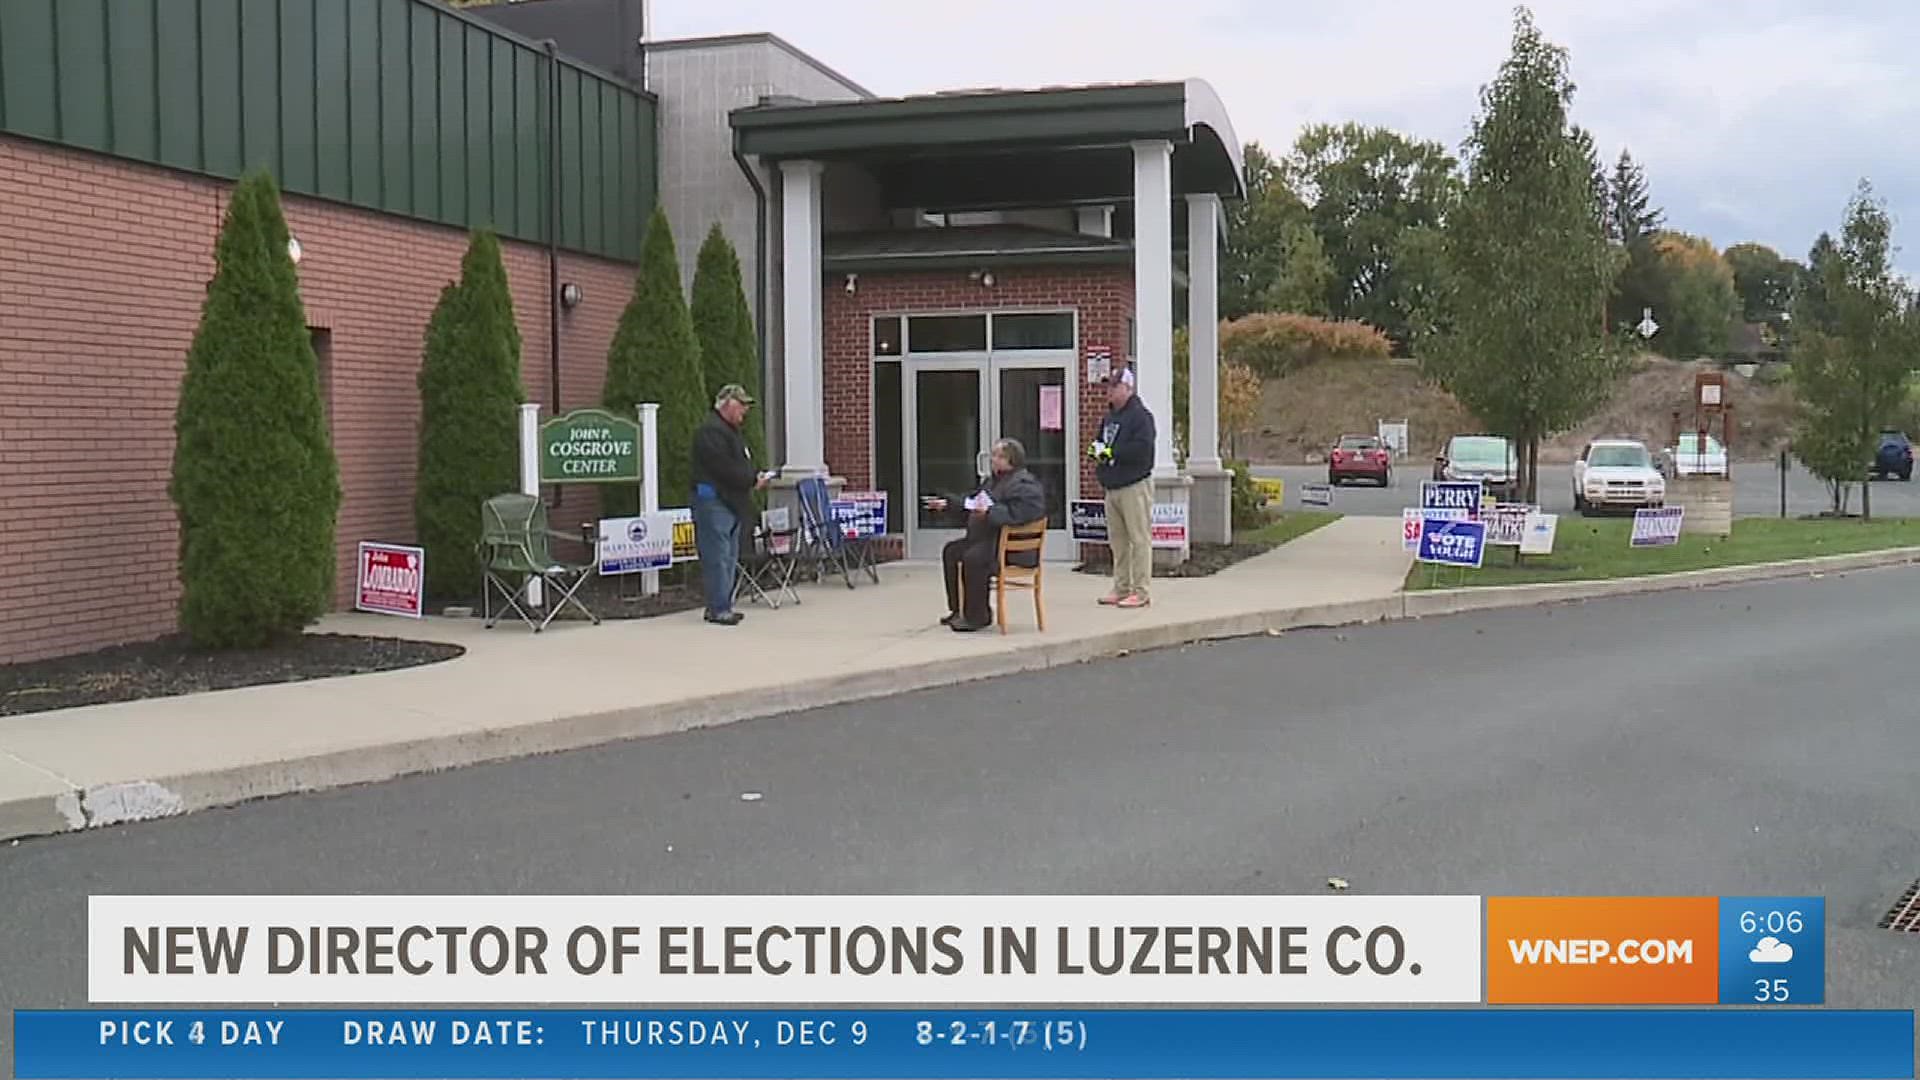 Luzerne County officials have named Michael Susek as the county's new Director of Elections.